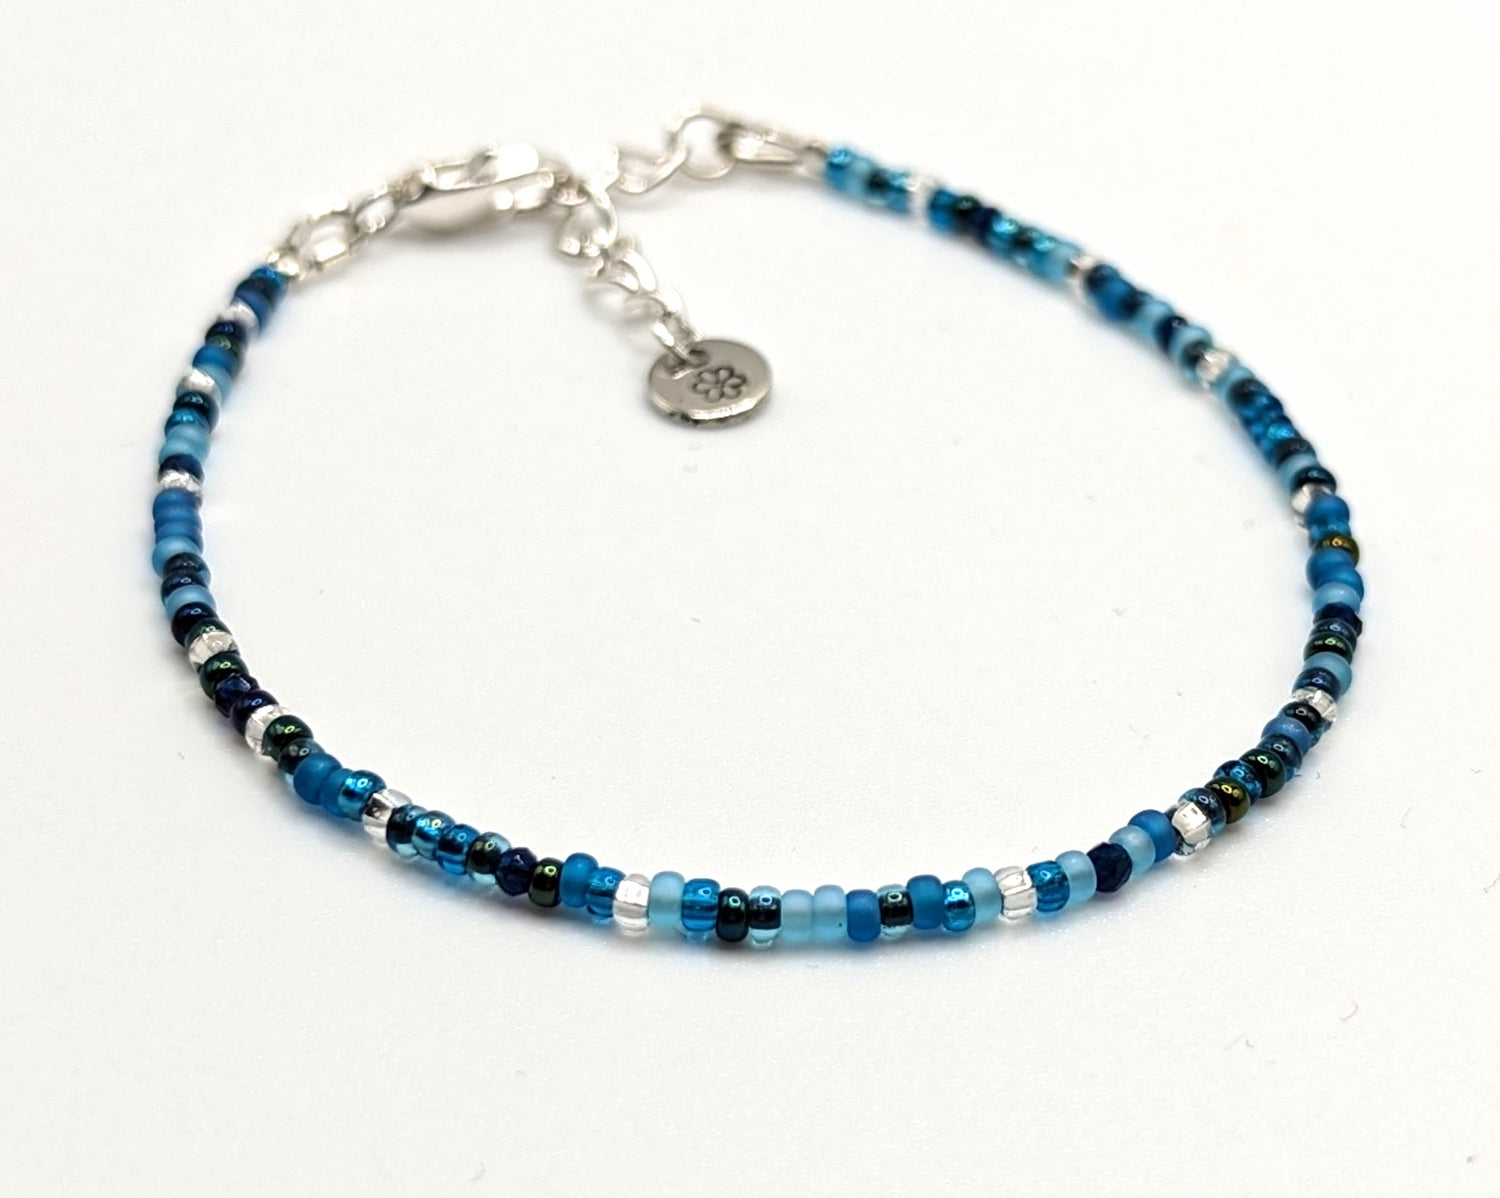 Dainty blue and silver seed bead bracelet